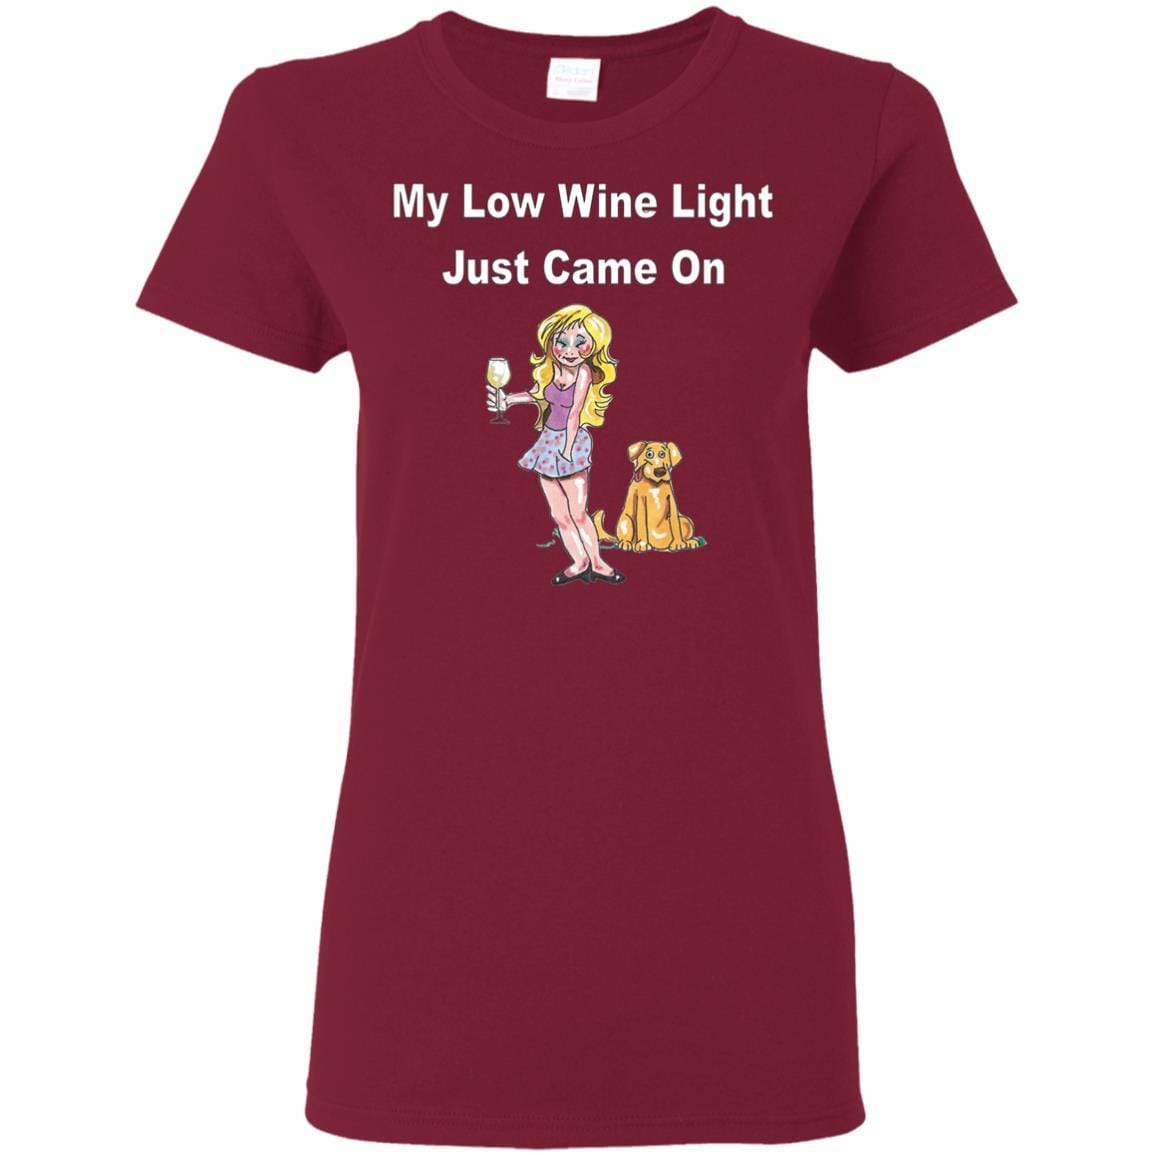 T-Shirts Cardinal Red / S WineyBitches.co 'Low Wine Light" Ladies' 5.3 oz. T-Shirt WineyBitchesCo